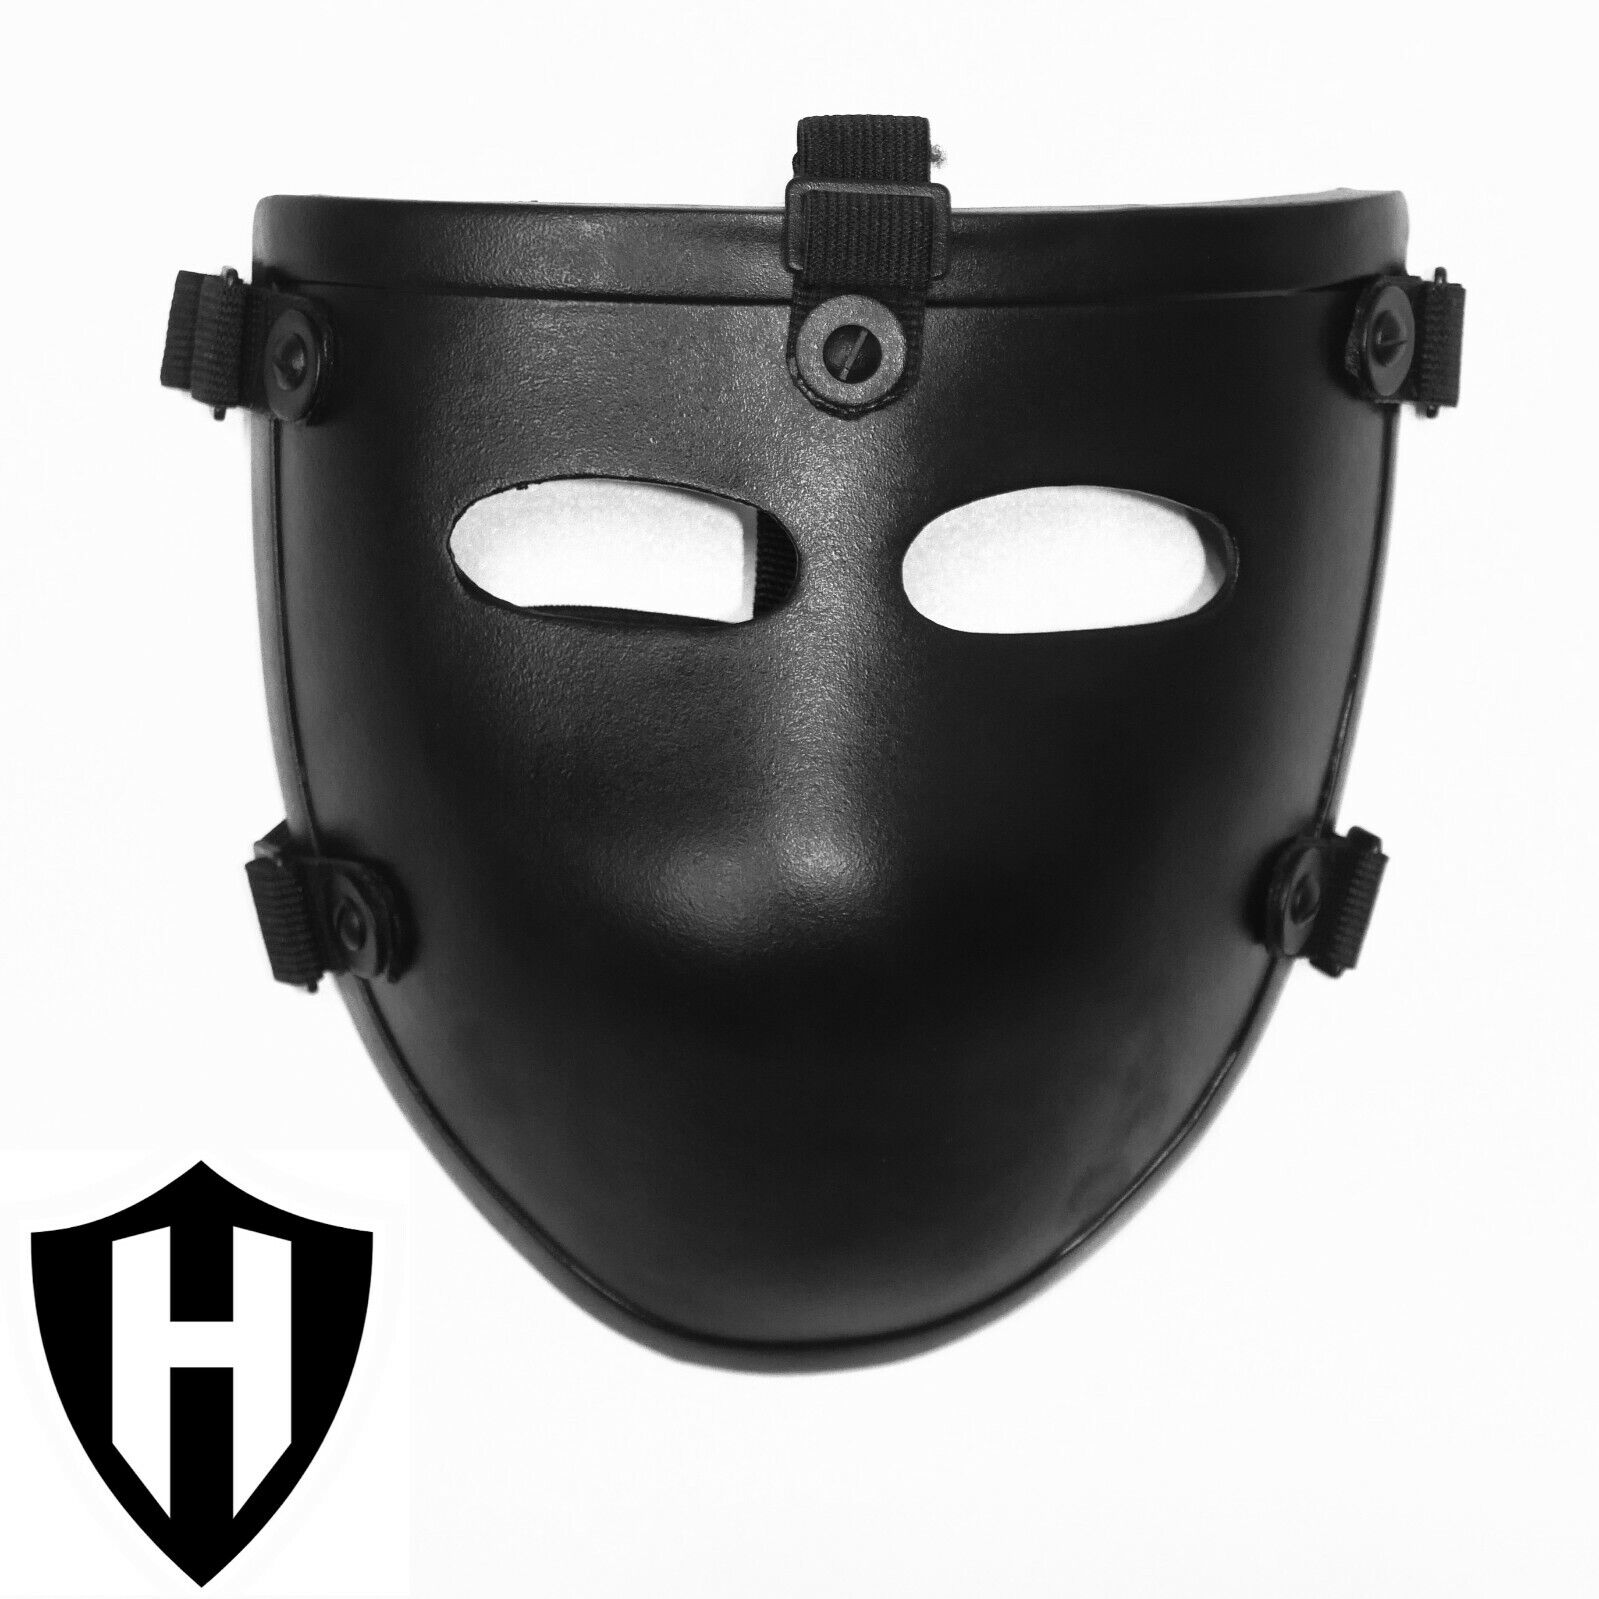 Level IIIA 3A Ballistic Mask, made with Kevlar  - .357 test - video - 150+ sold